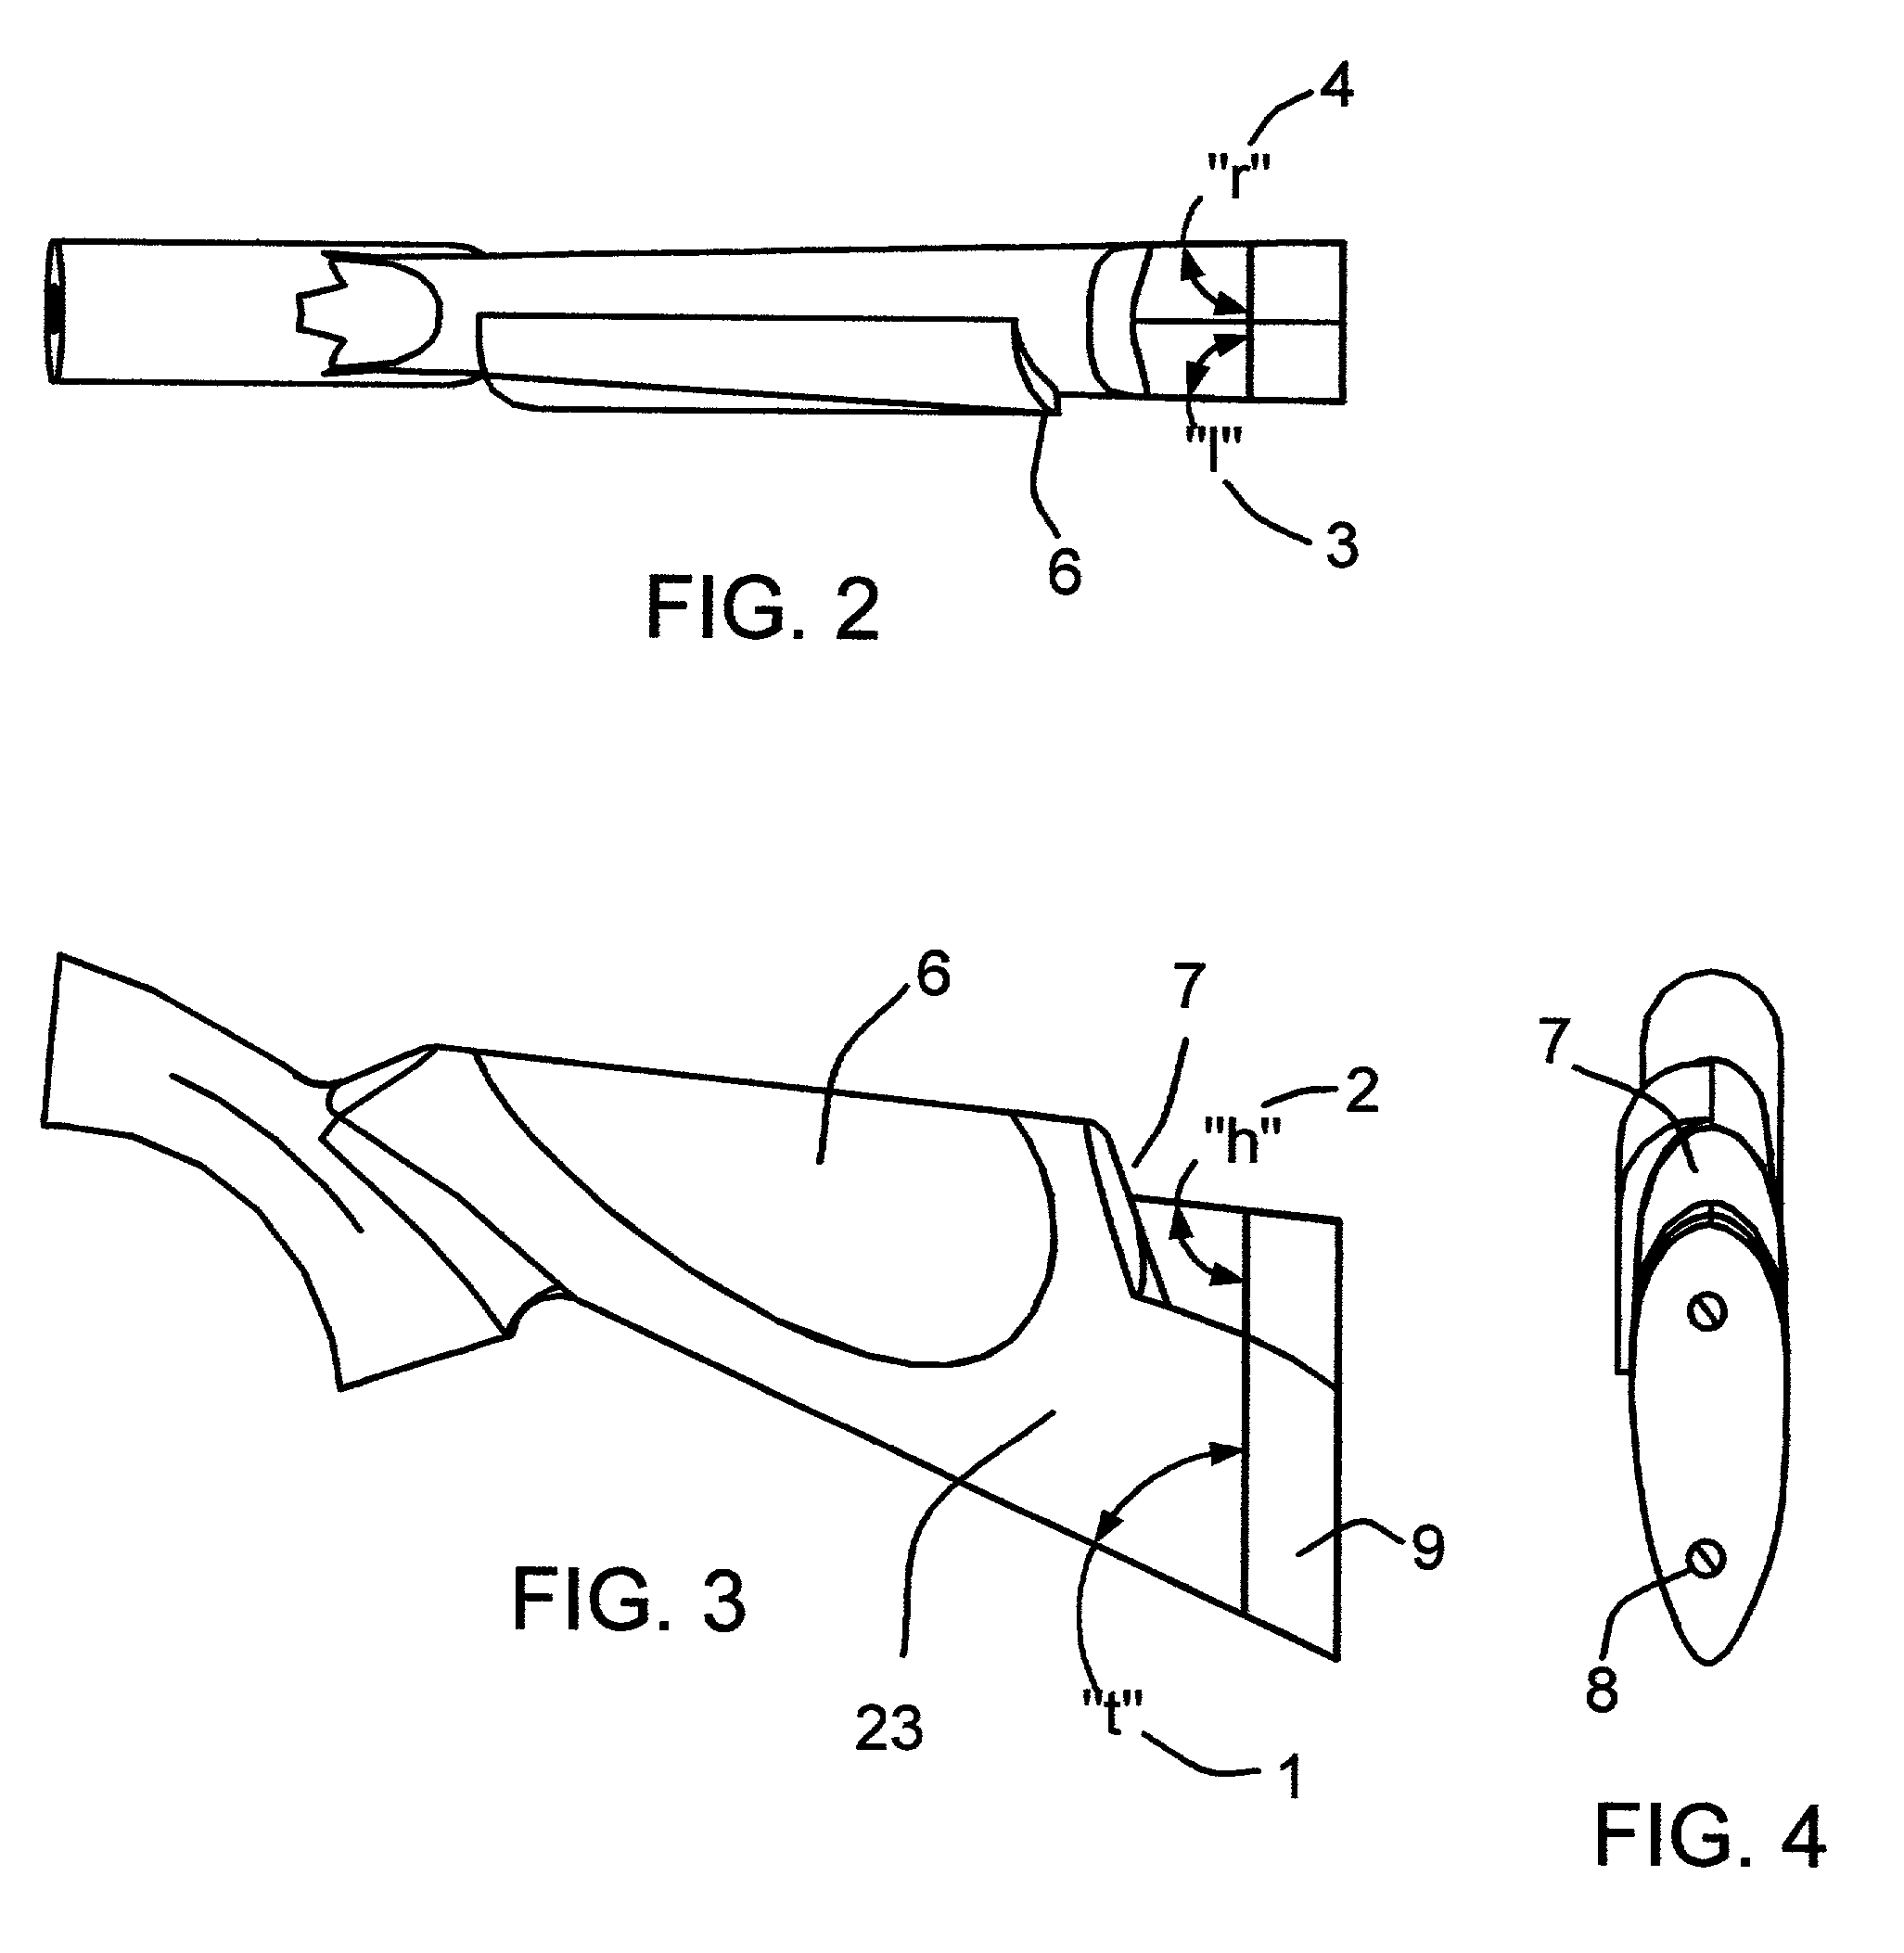 Method and apparatus for precisely fitting, reproducing, and creating 3-dimensional objects from digitized and/or parametric data inputs using computer aided design and manufacturing technology